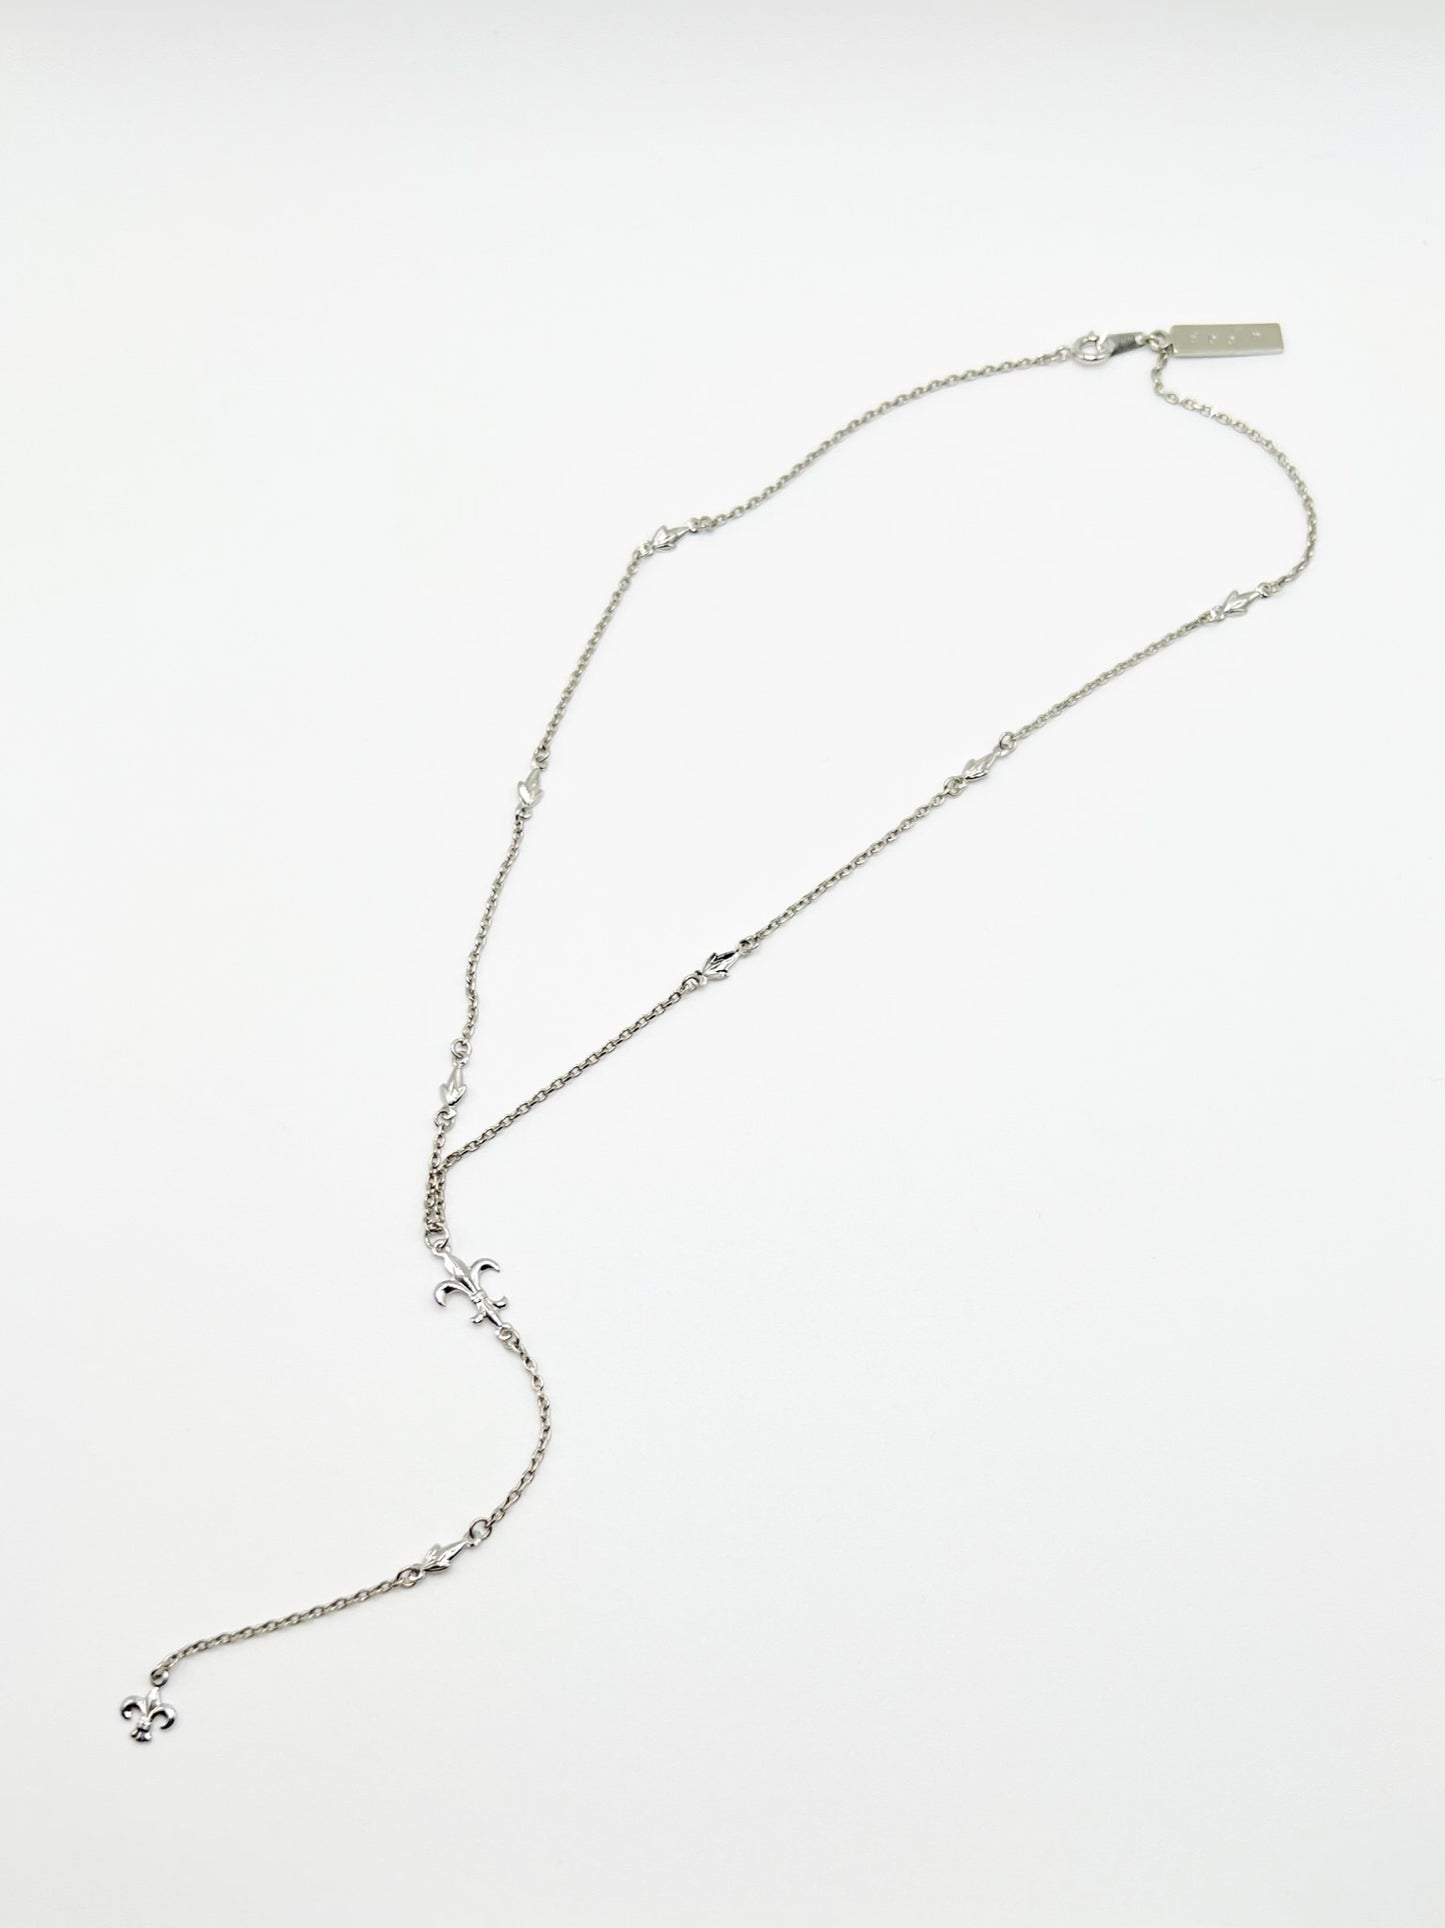 NW lily motif necklace - Silver